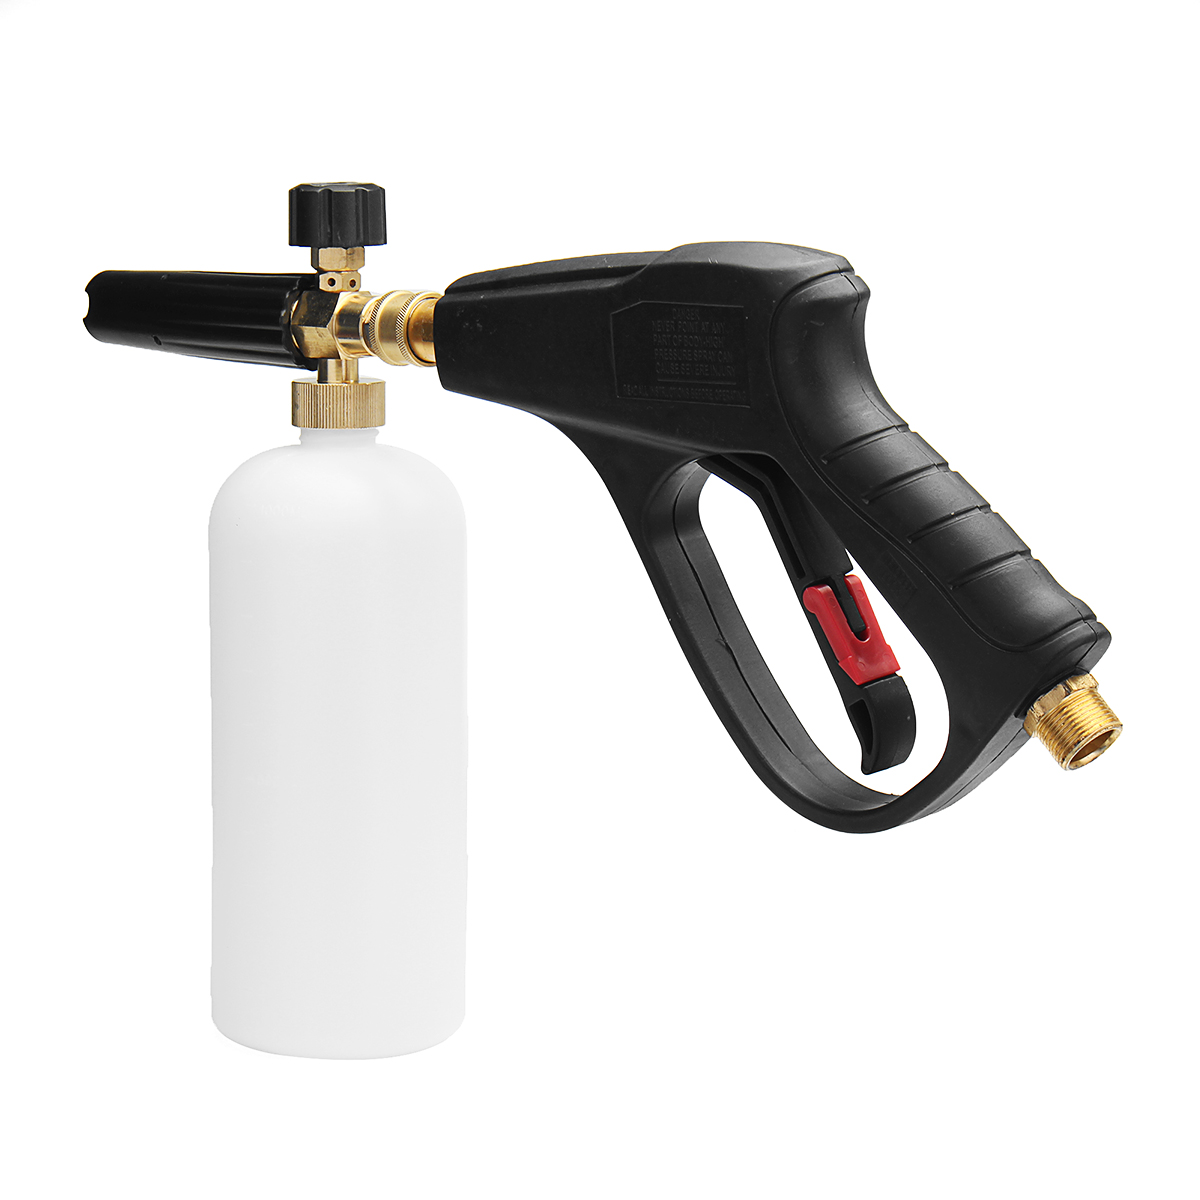 High-Pressure-Washer-Jet-14quot-Snow-Foam-Lance-Cannon-Car-Clean-Washer-Bottle-1374822-5